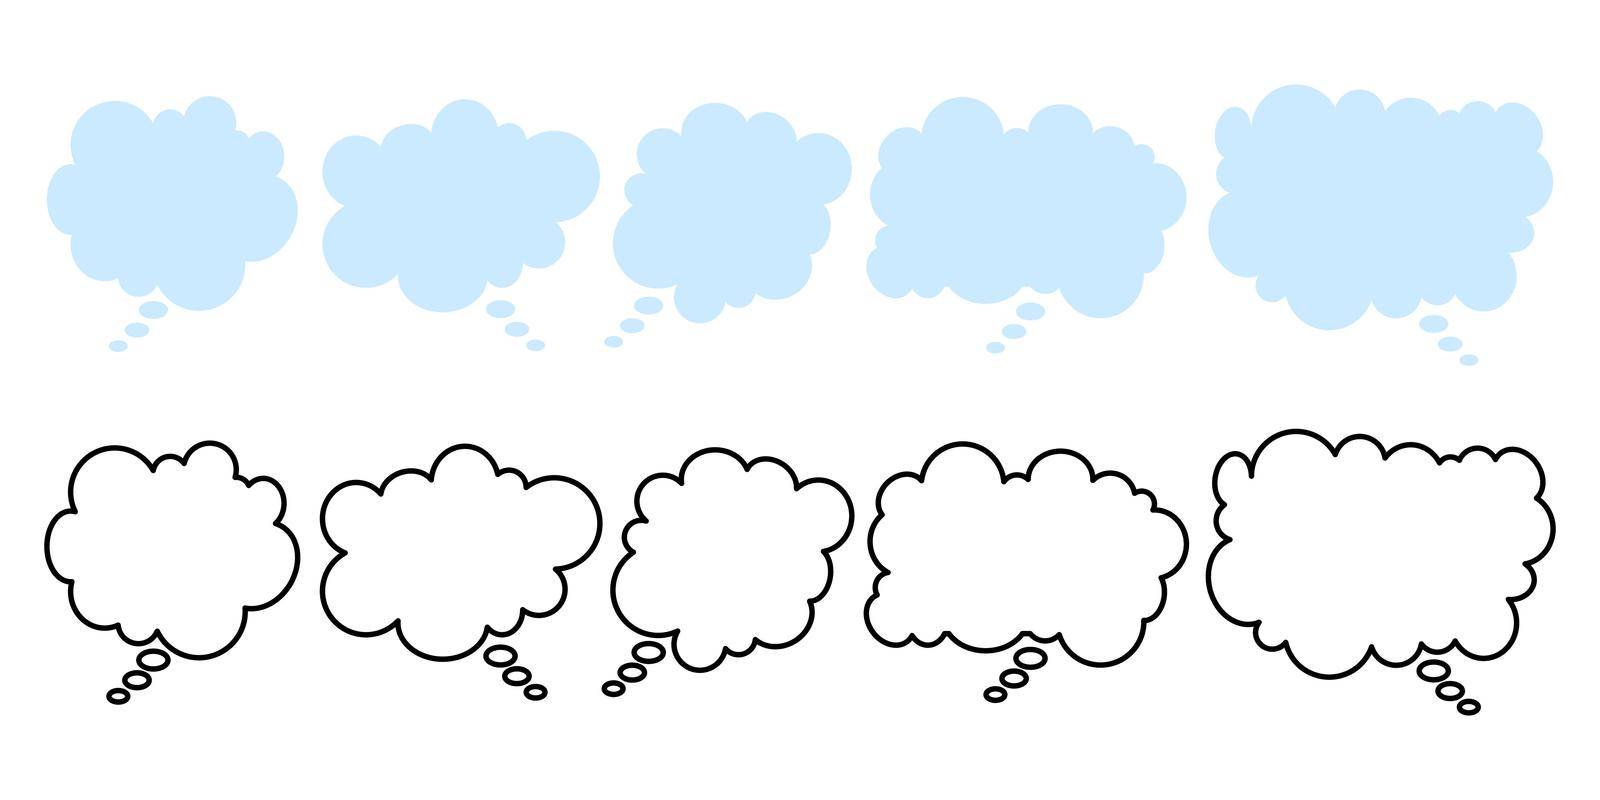 Cloud speech bubbles, great design for any purposes. Conversation talk message balloon. Talk bubble speech icon. Abstract background set. Chat message frame banner.Vector illustration, cartoon set.